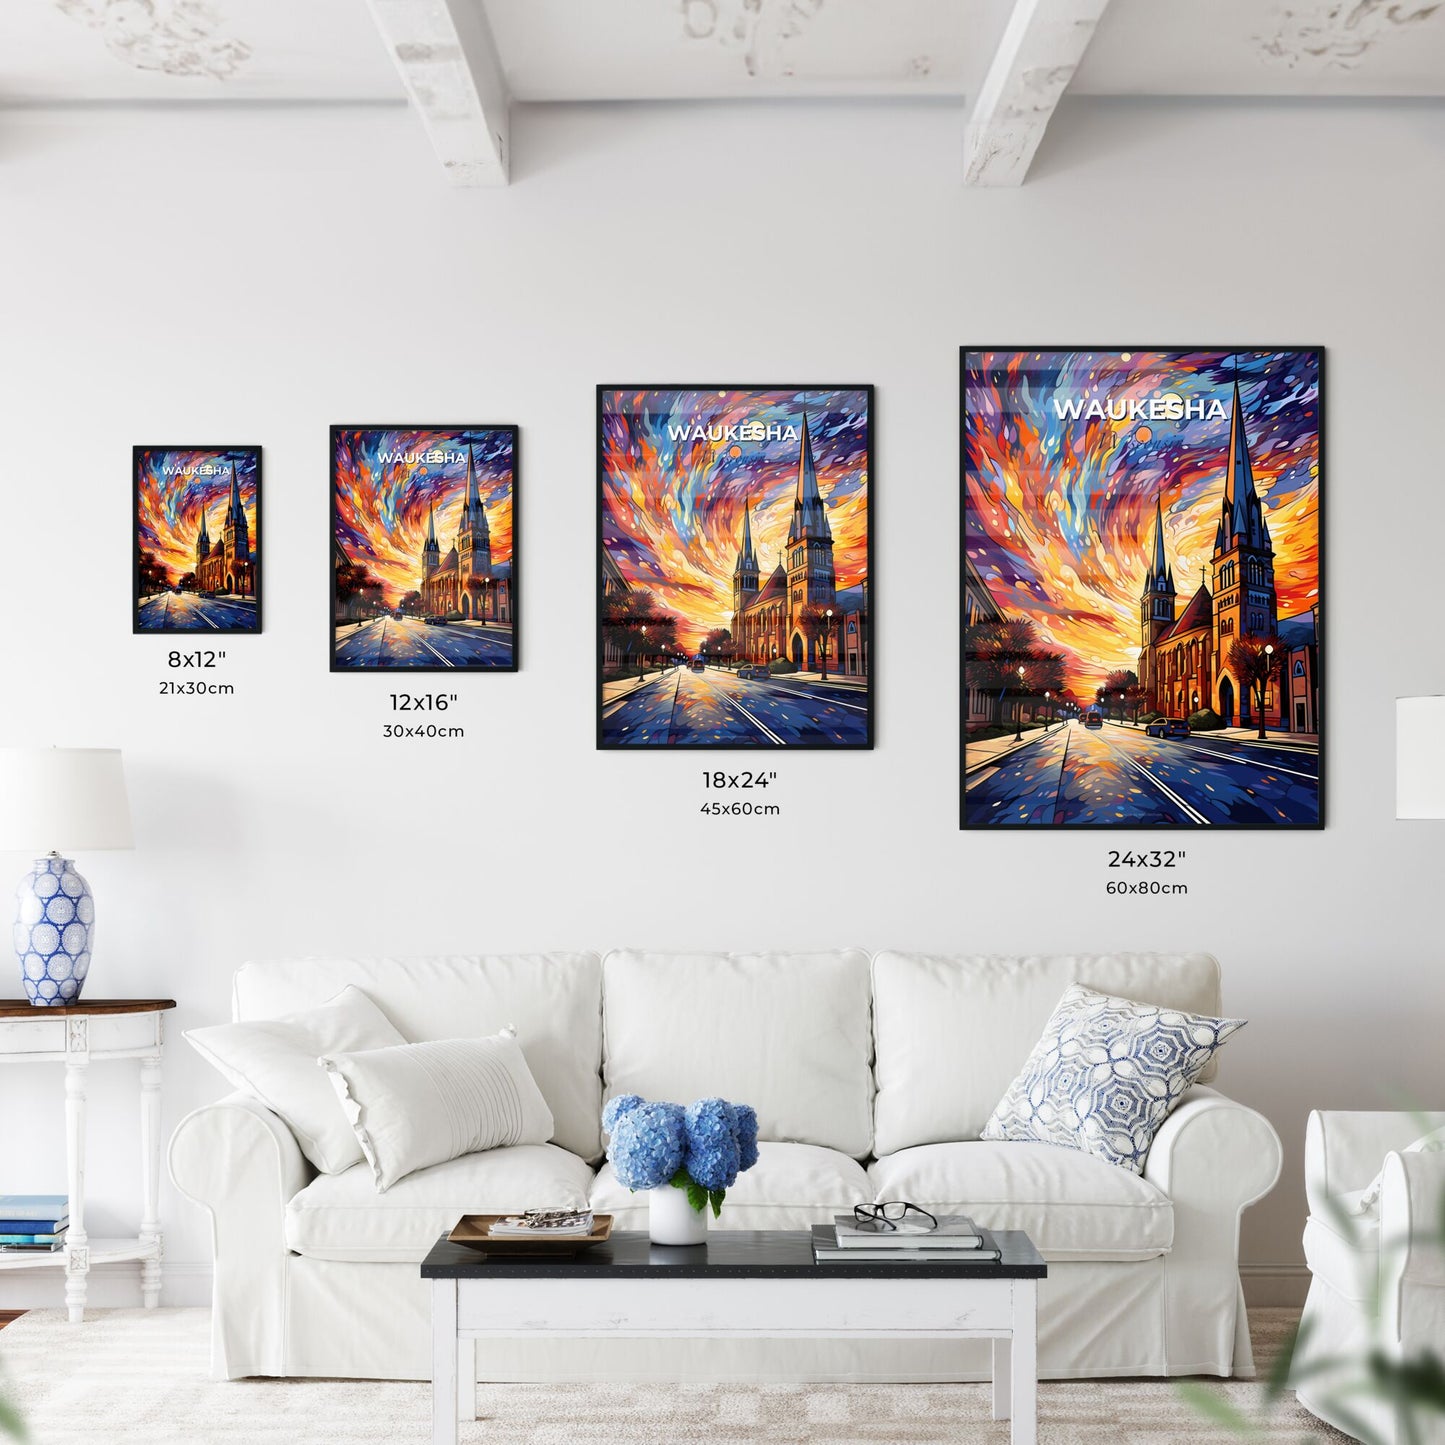 Waukesha, Wisconsin, A Poster of a colorful sky over a church Default Title